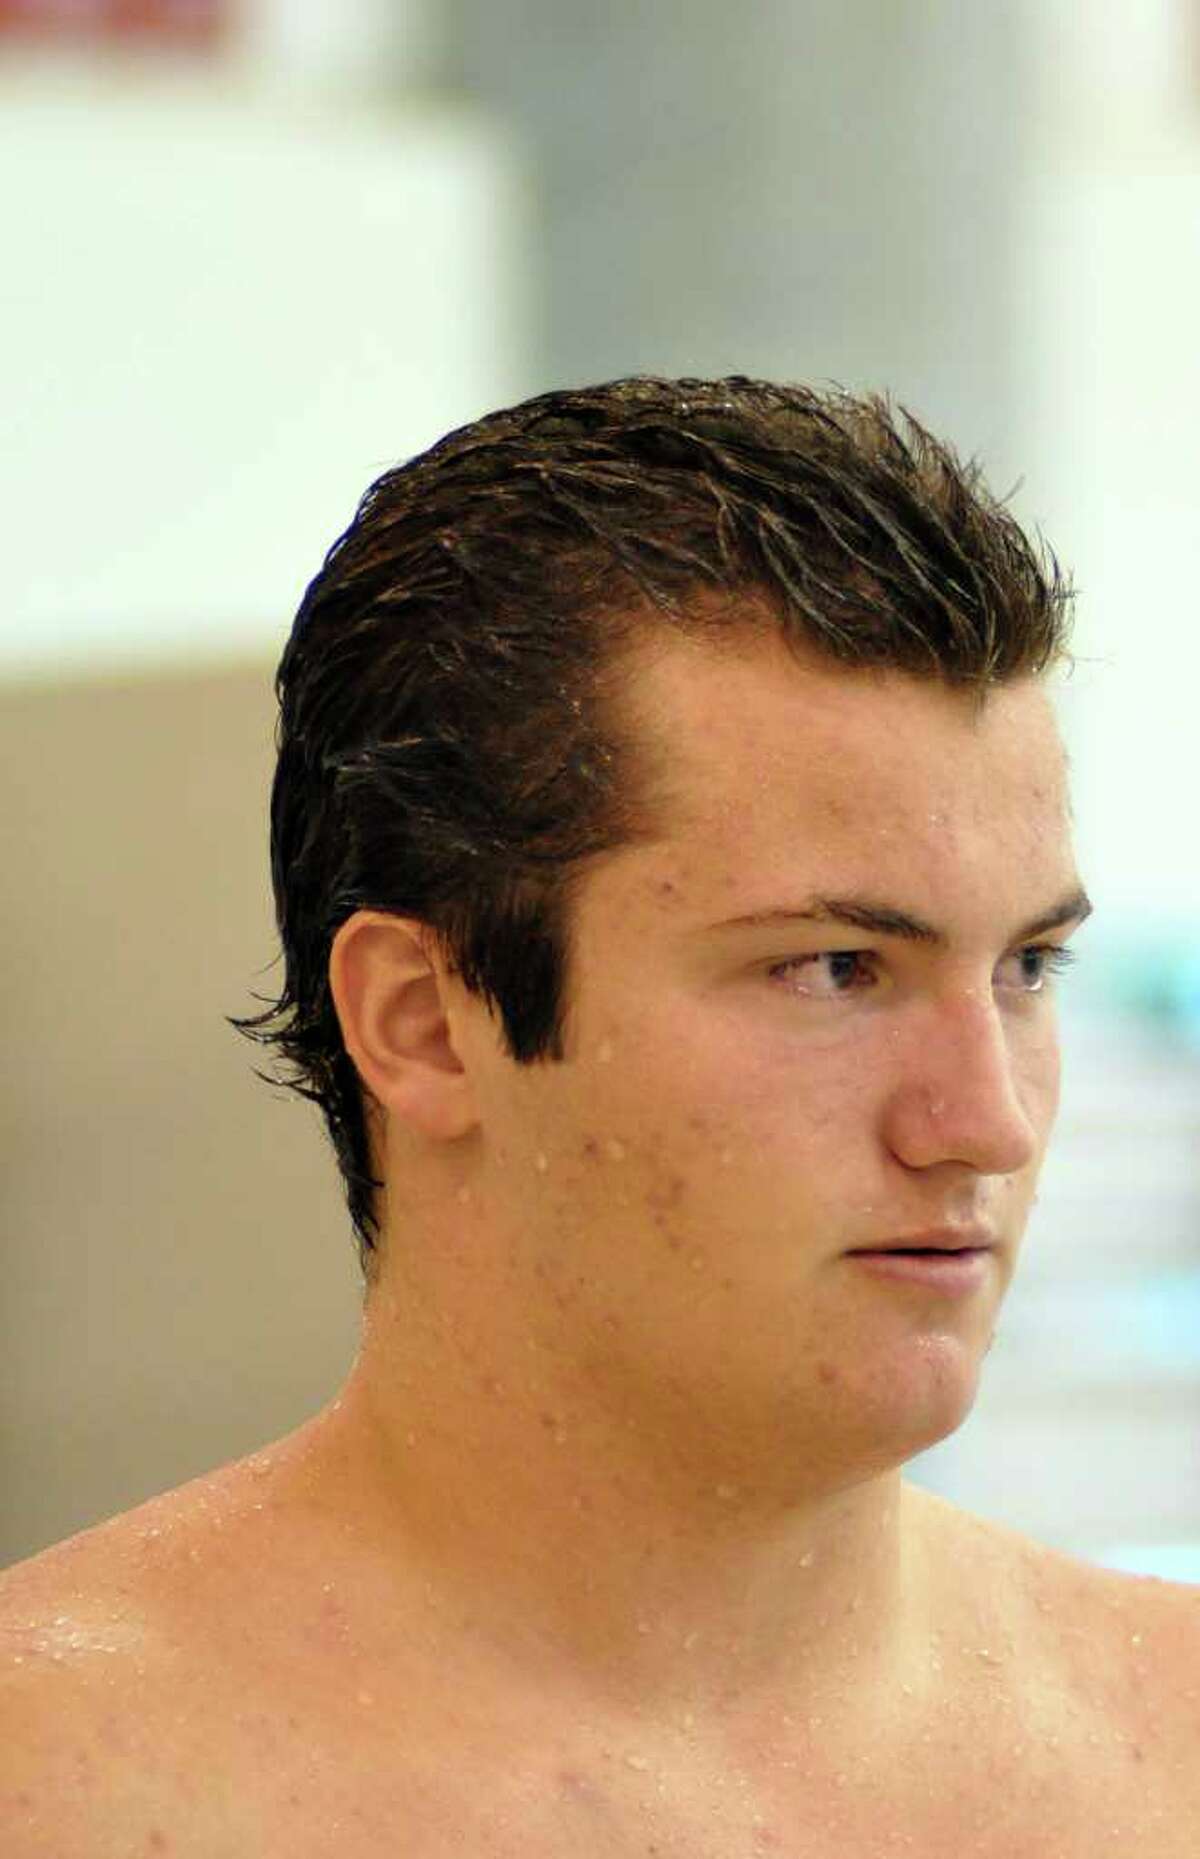 Greenwich's J Whelan during waterpolo practice at Greenwich High School on Thursday, Sept. 8, 2011.